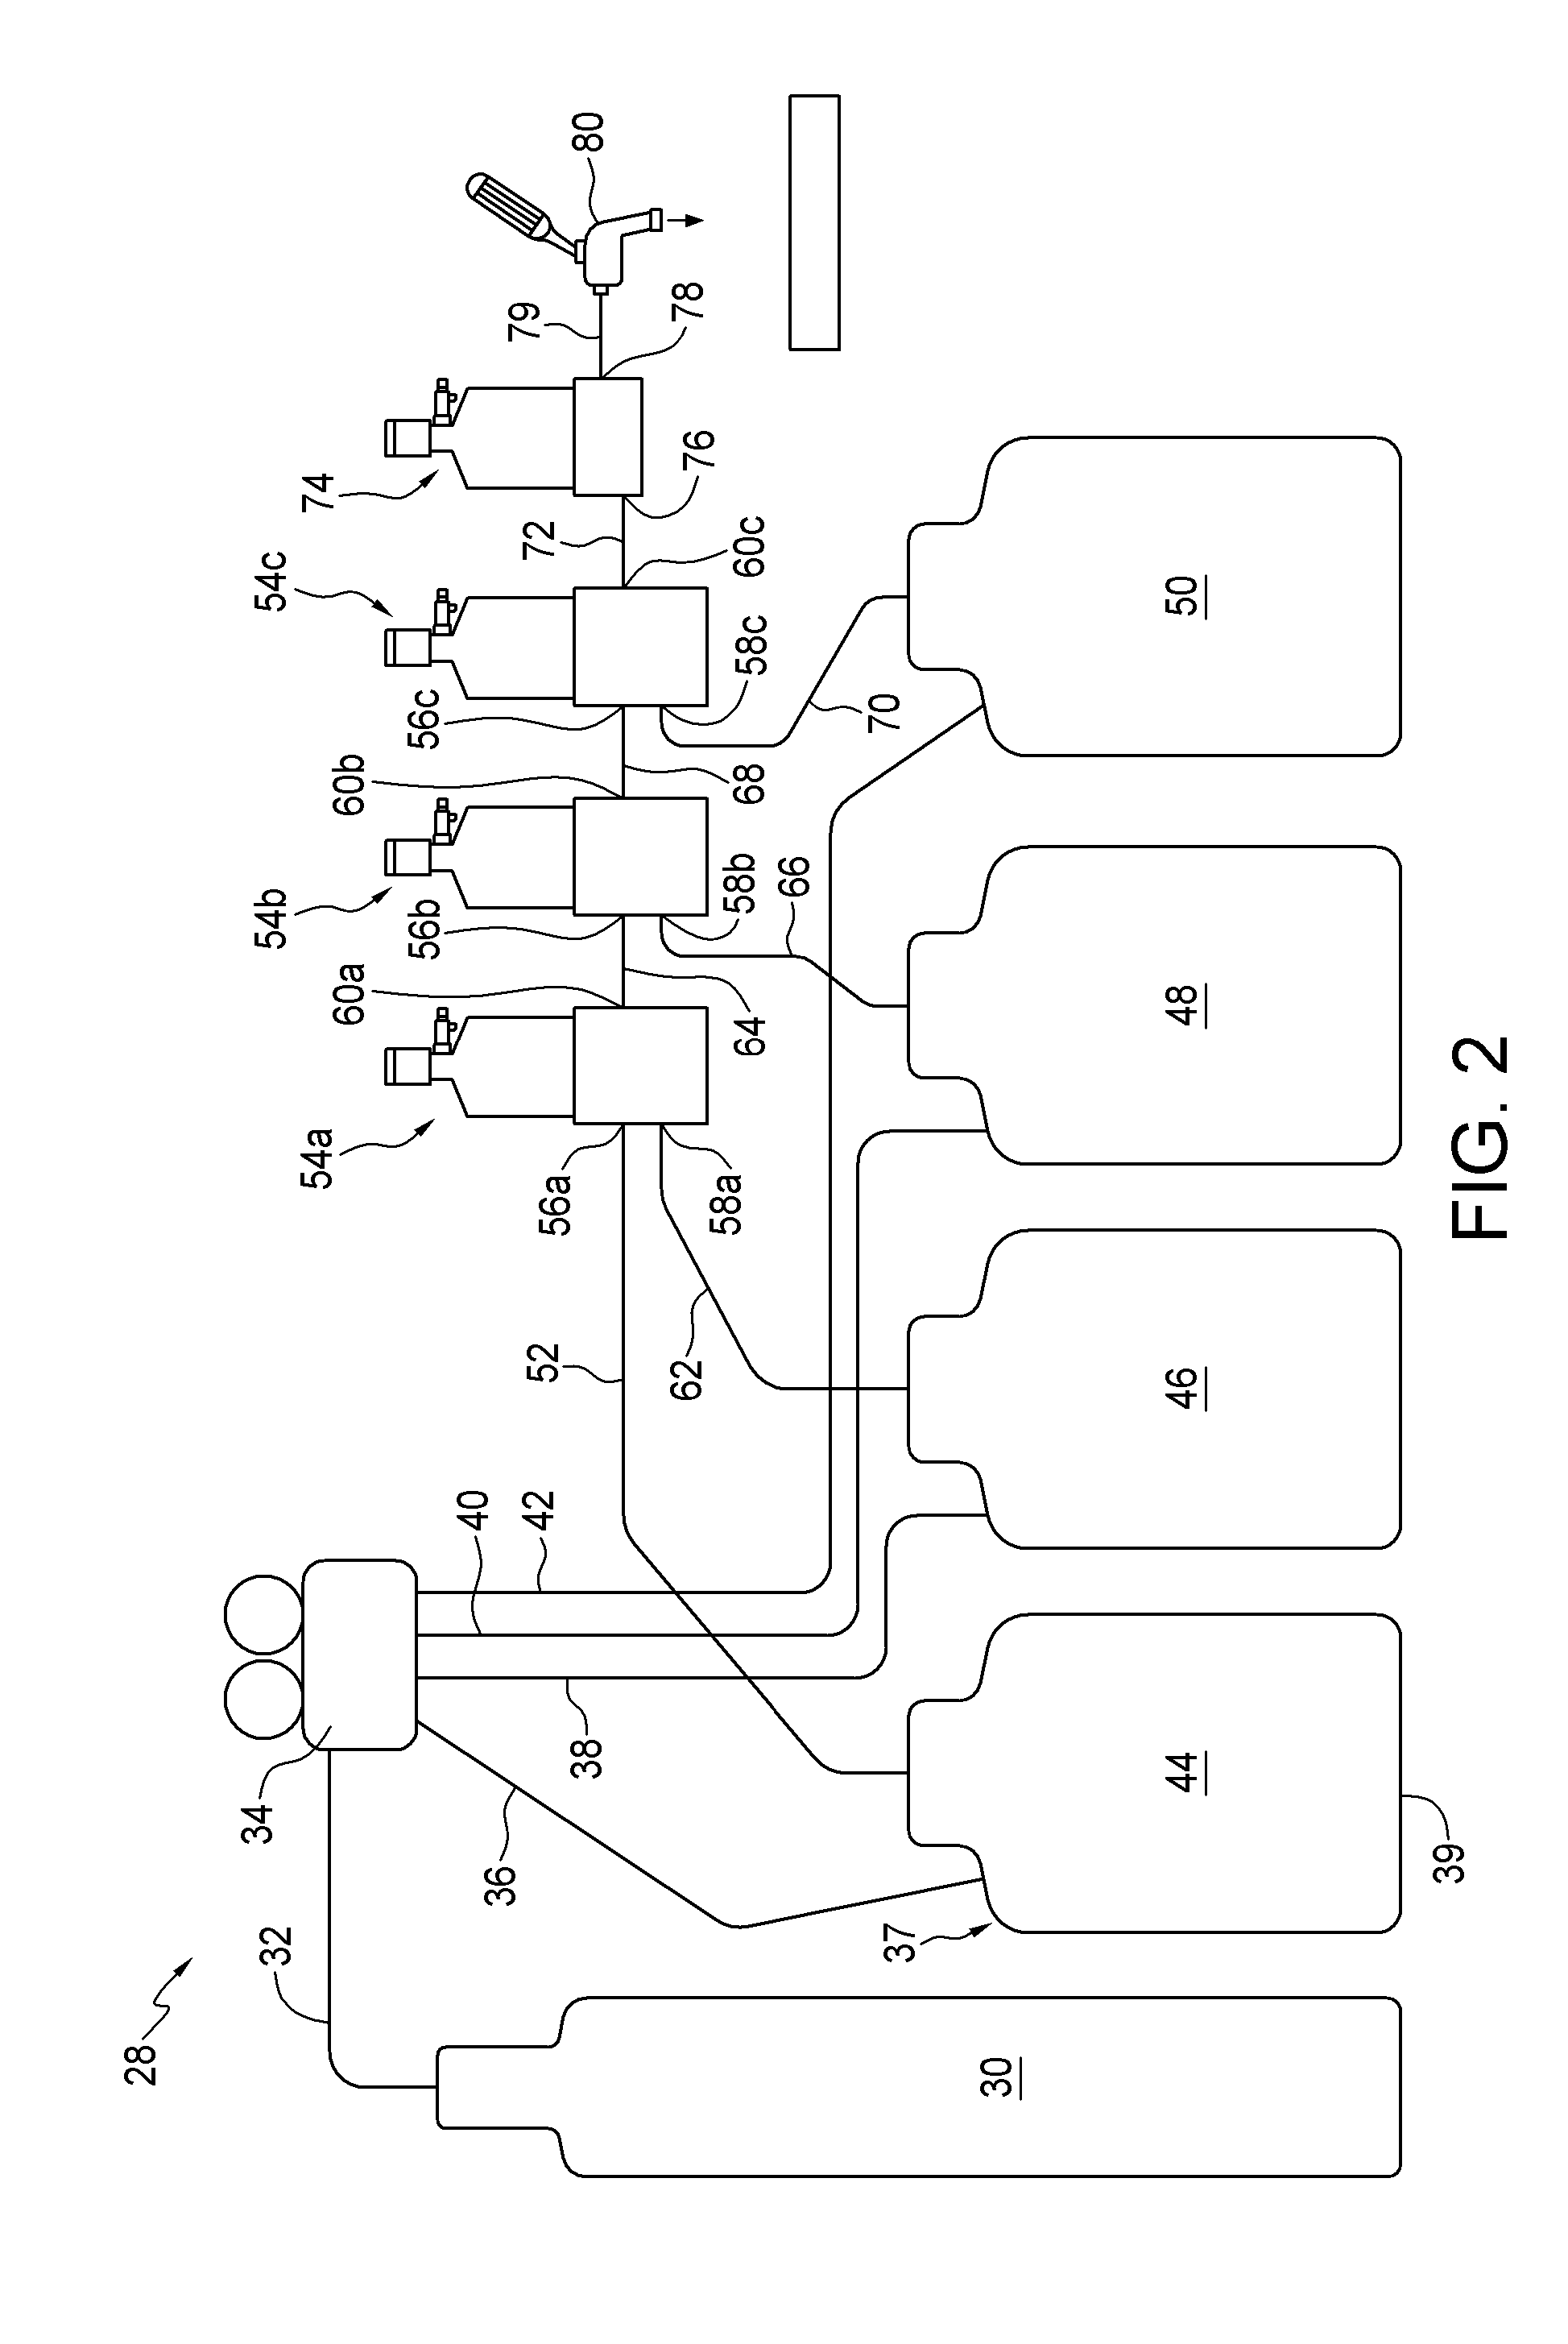 Valve apparatus for selectively dispensing liquid from a plurality of sources